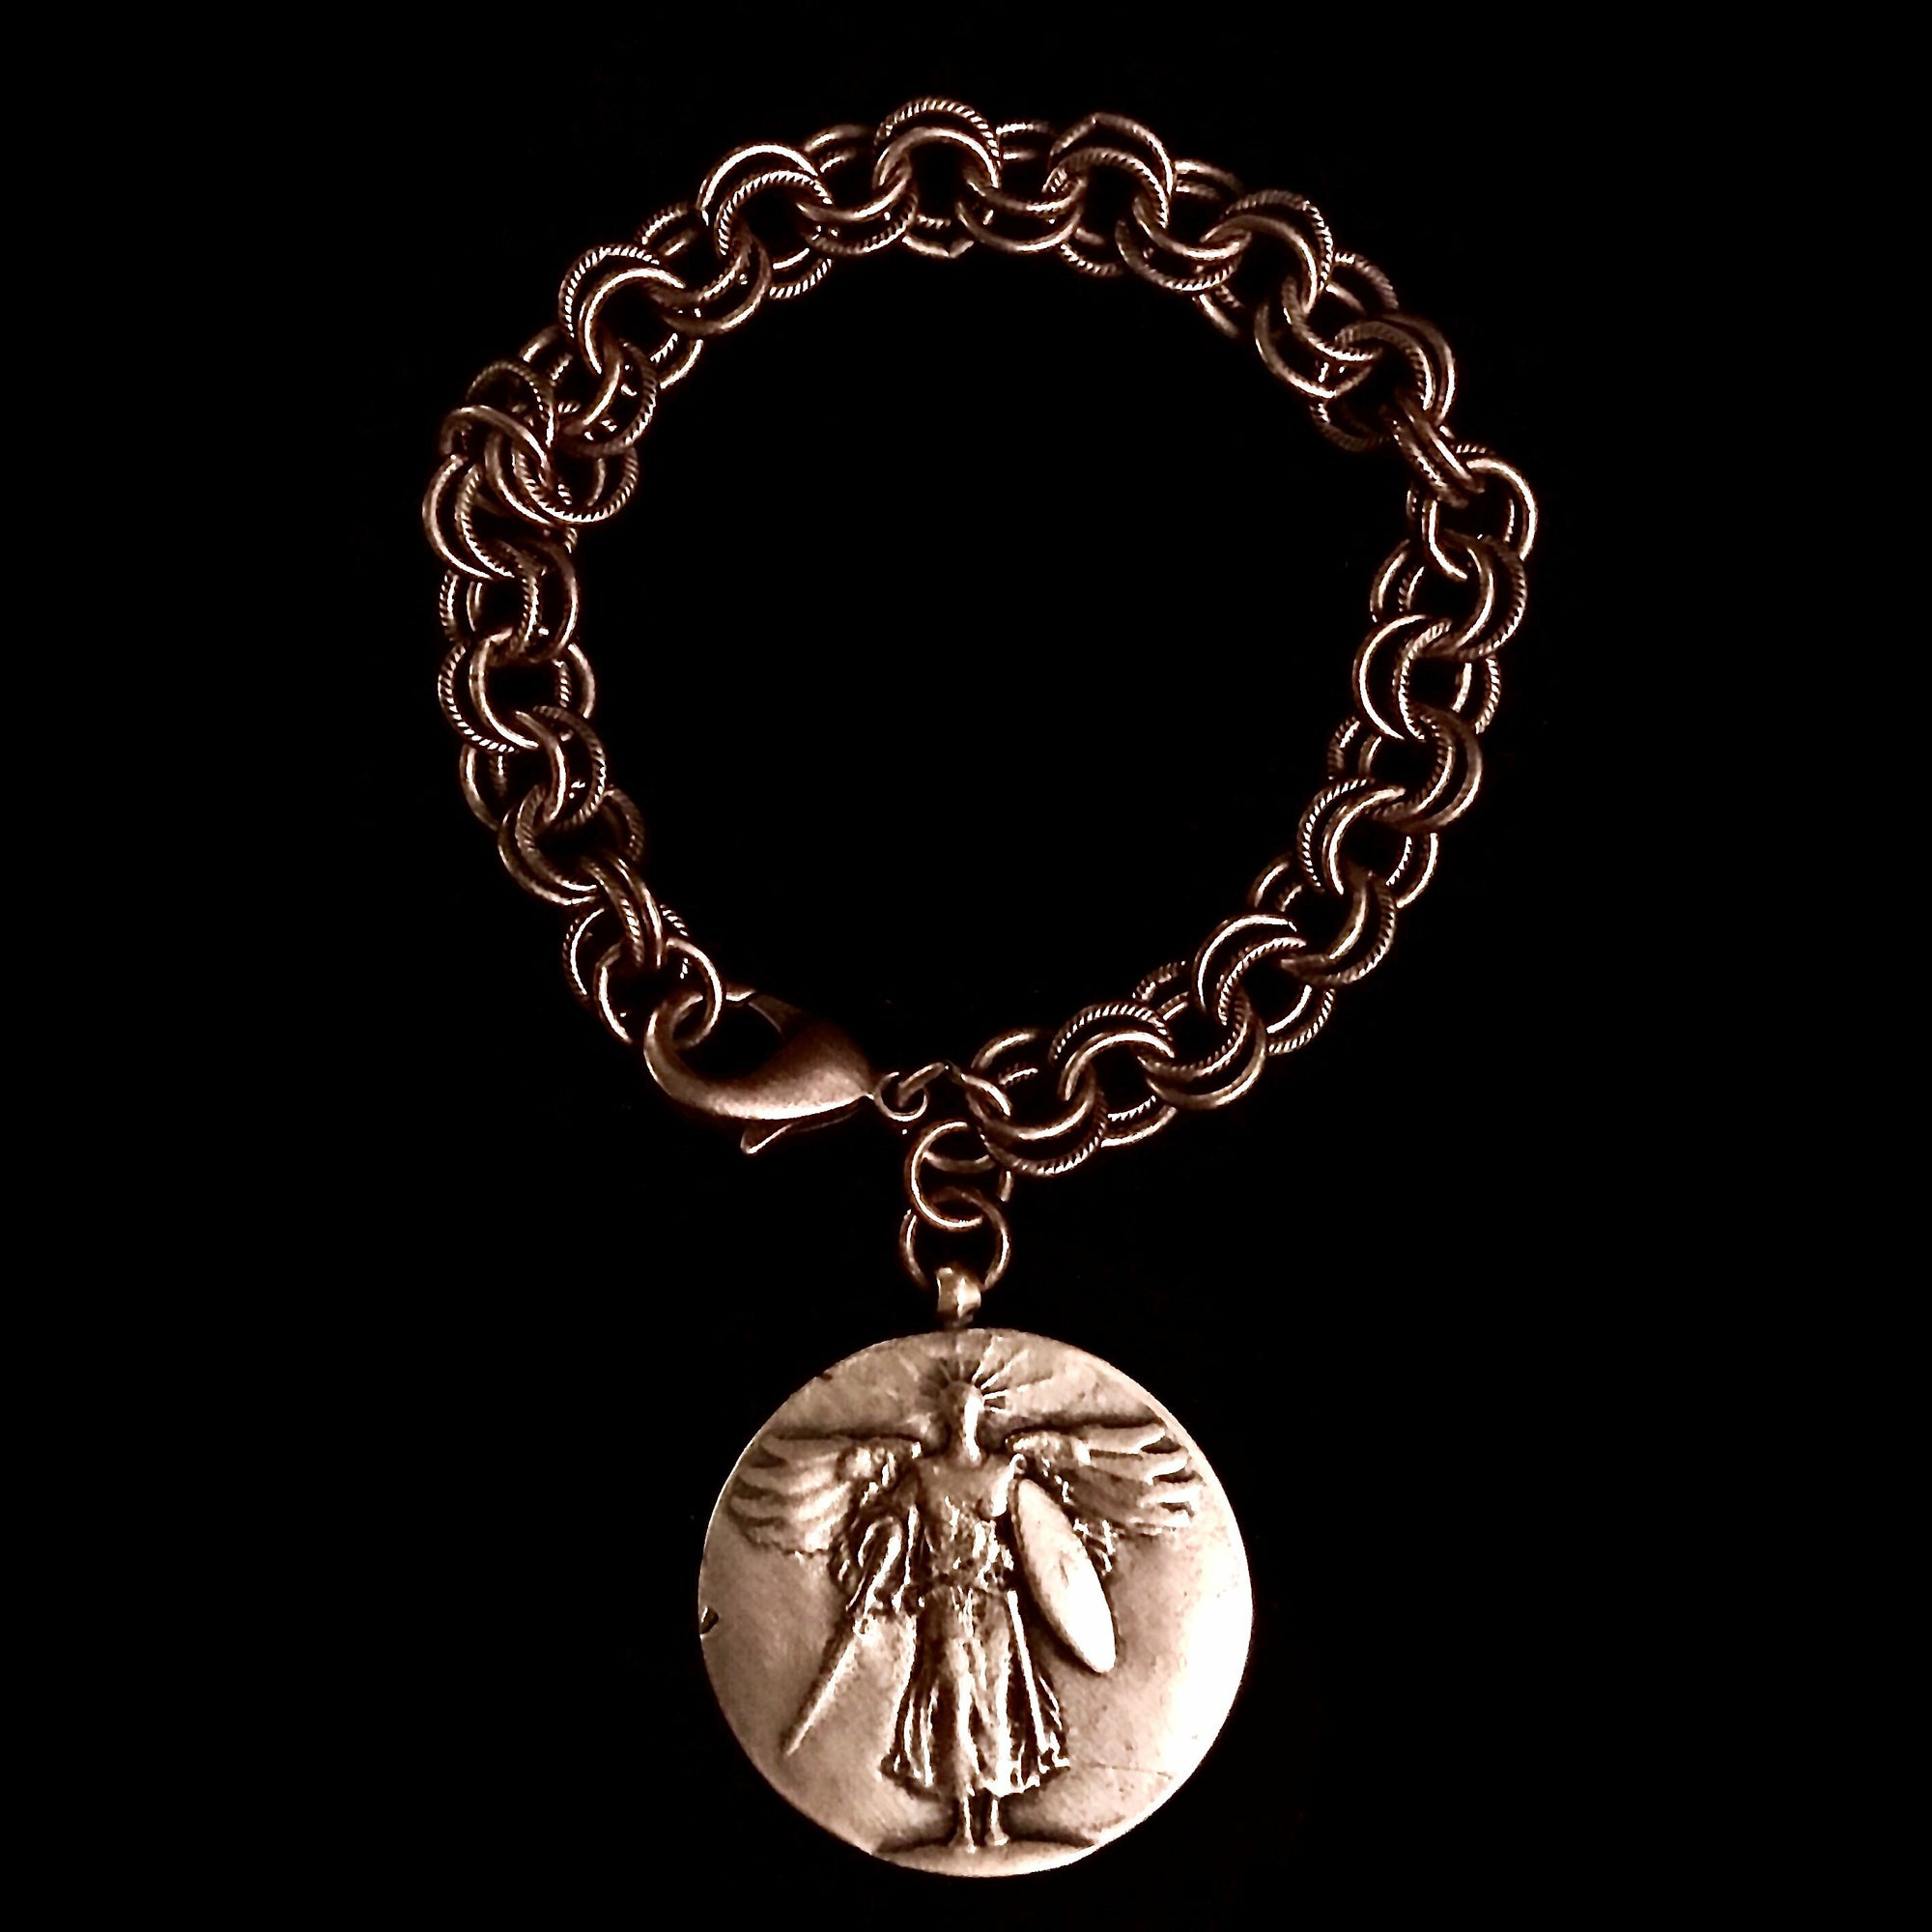 Saint Michael Victory Cable Link Bracelet by Whispering Goddess - Bronze